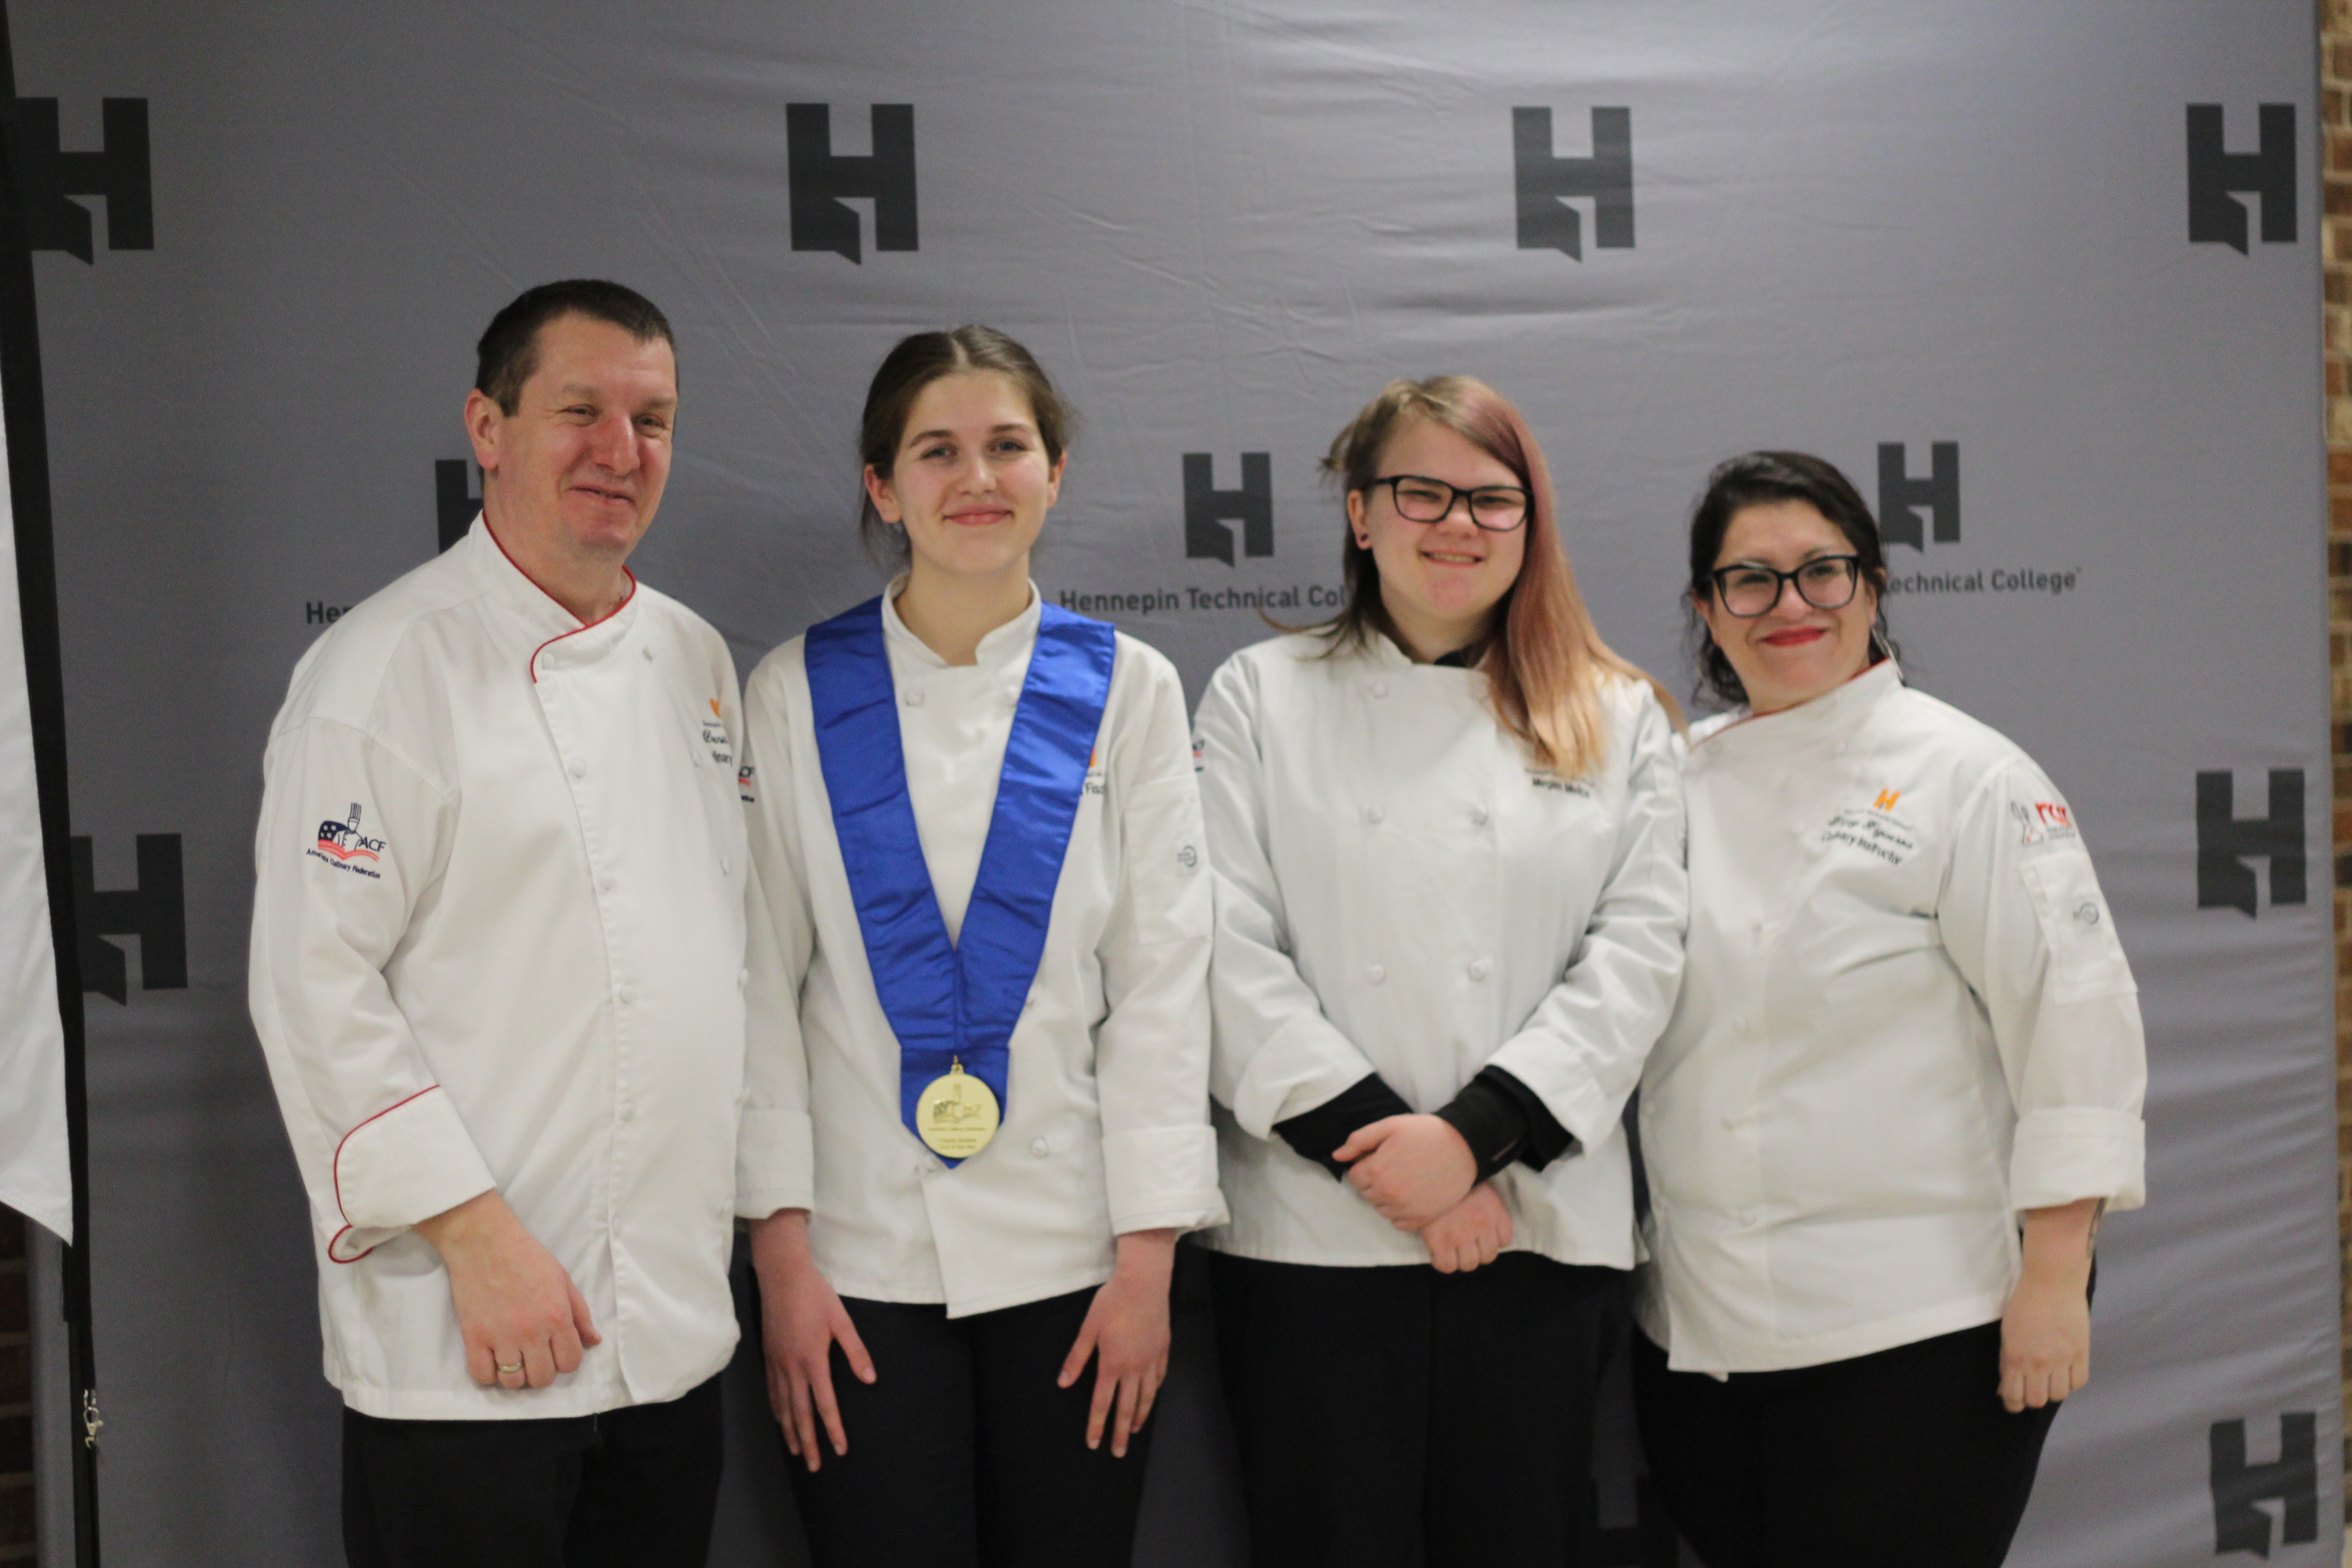 chef and students at award ceremony